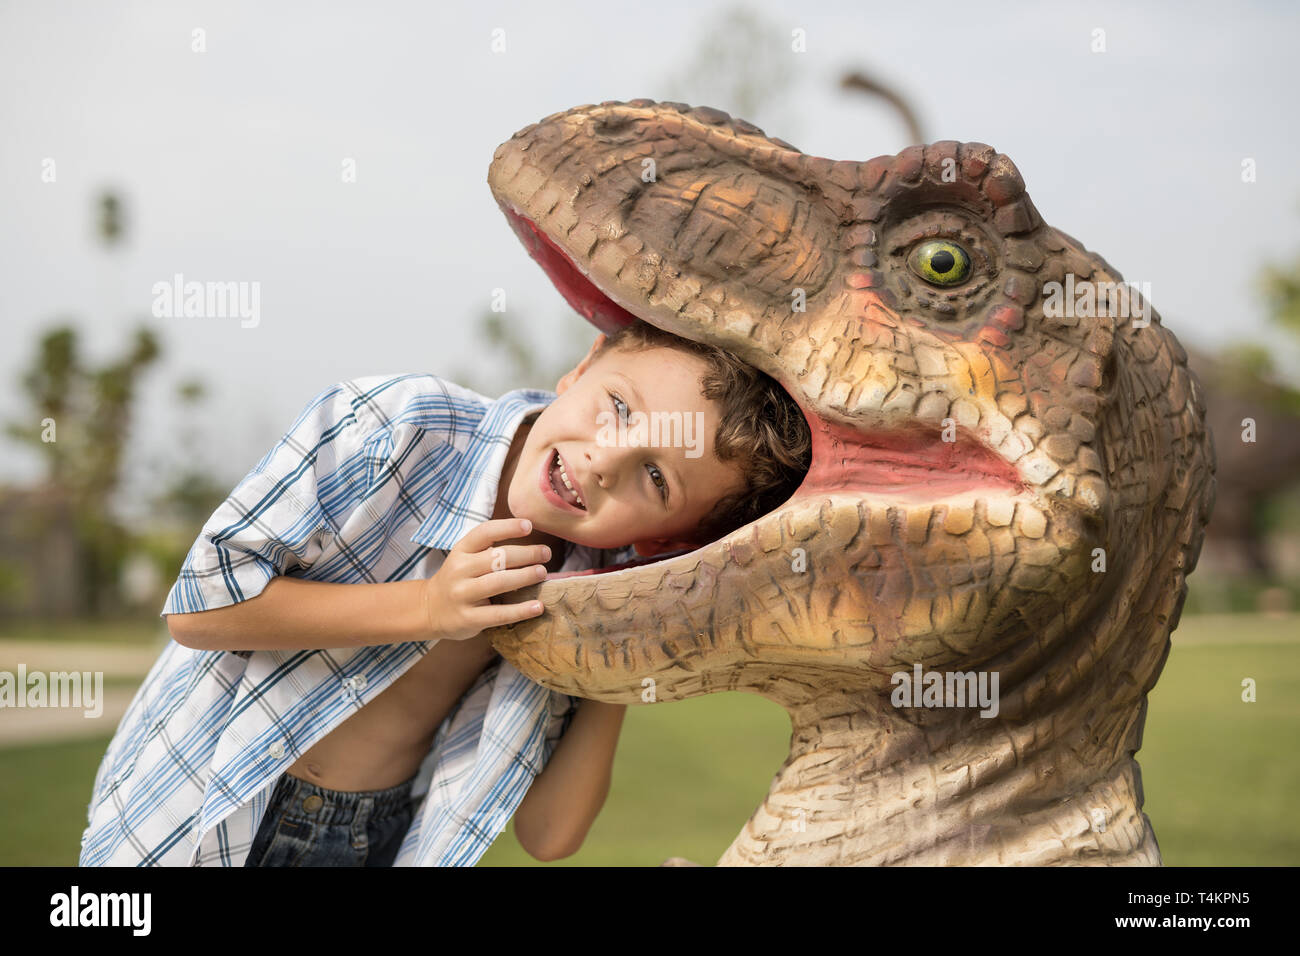 T Rex Dino: Play T Rex Dino for free on LittleGames